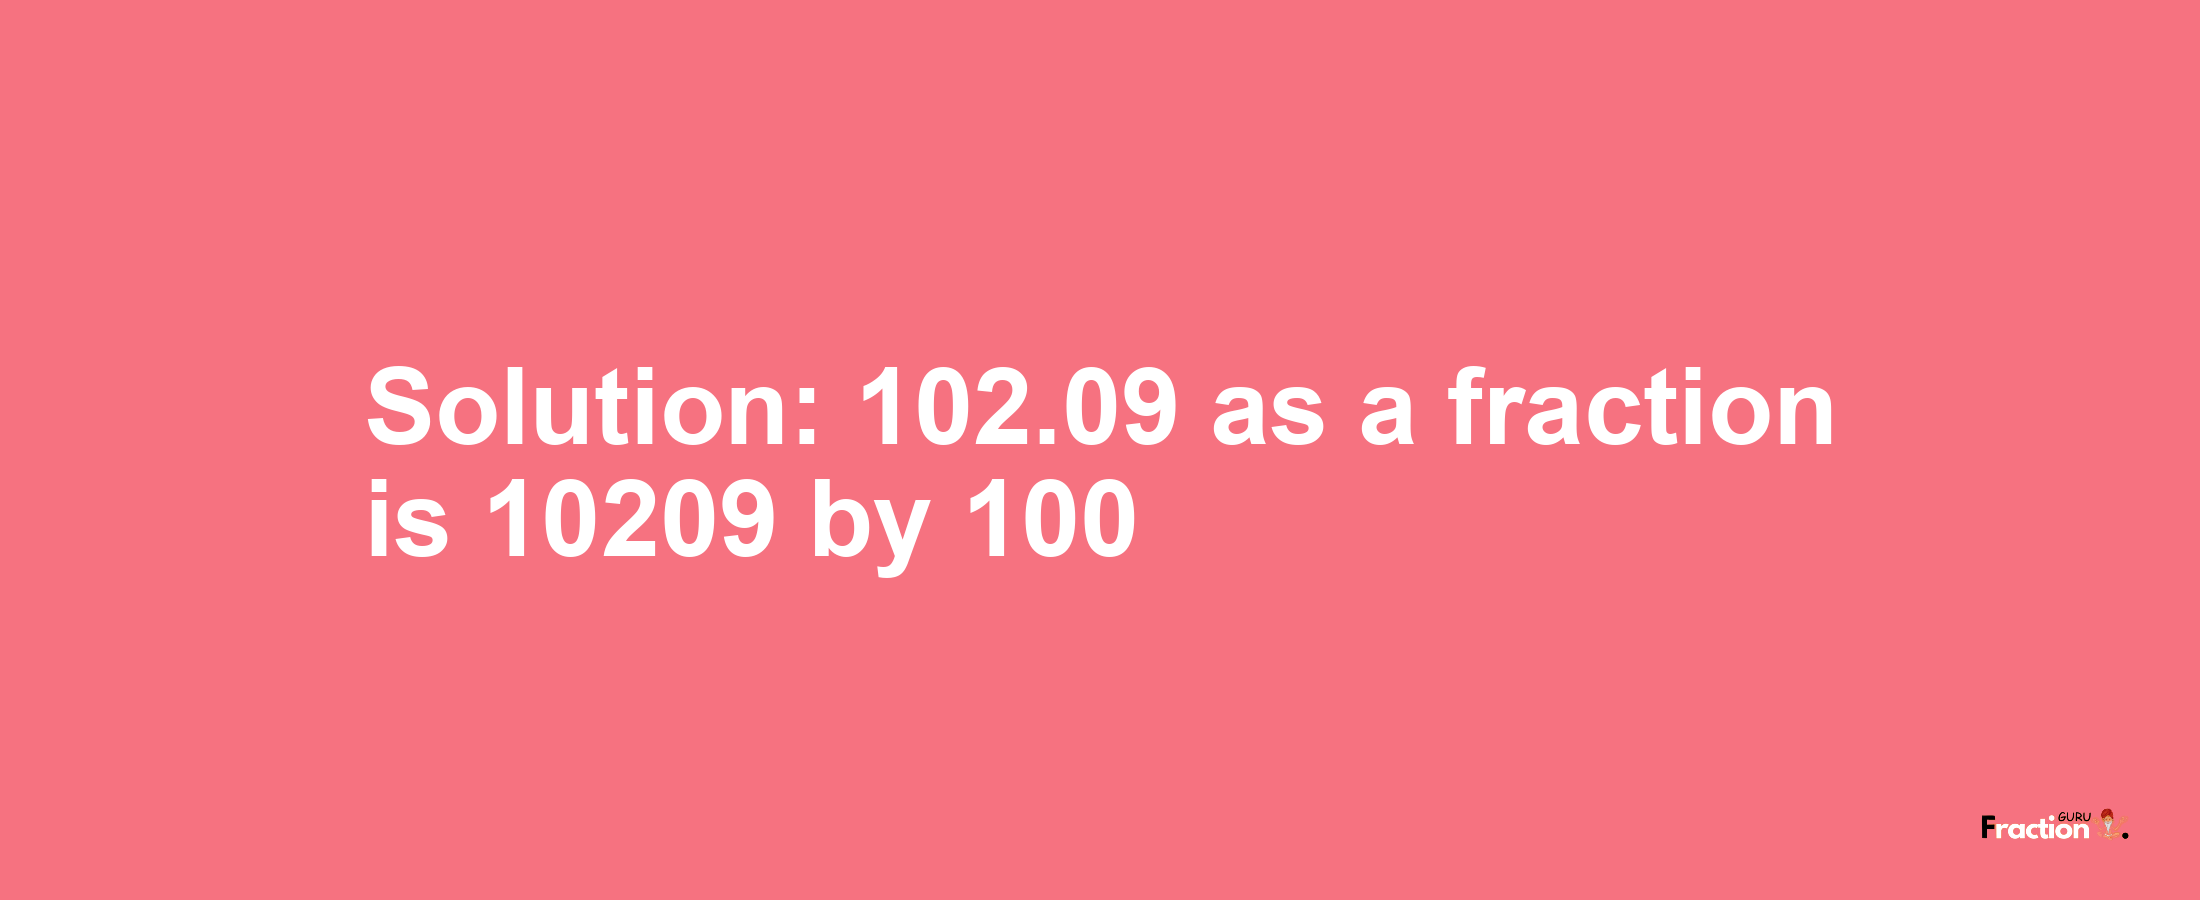 Solution:102.09 as a fraction is 10209/100